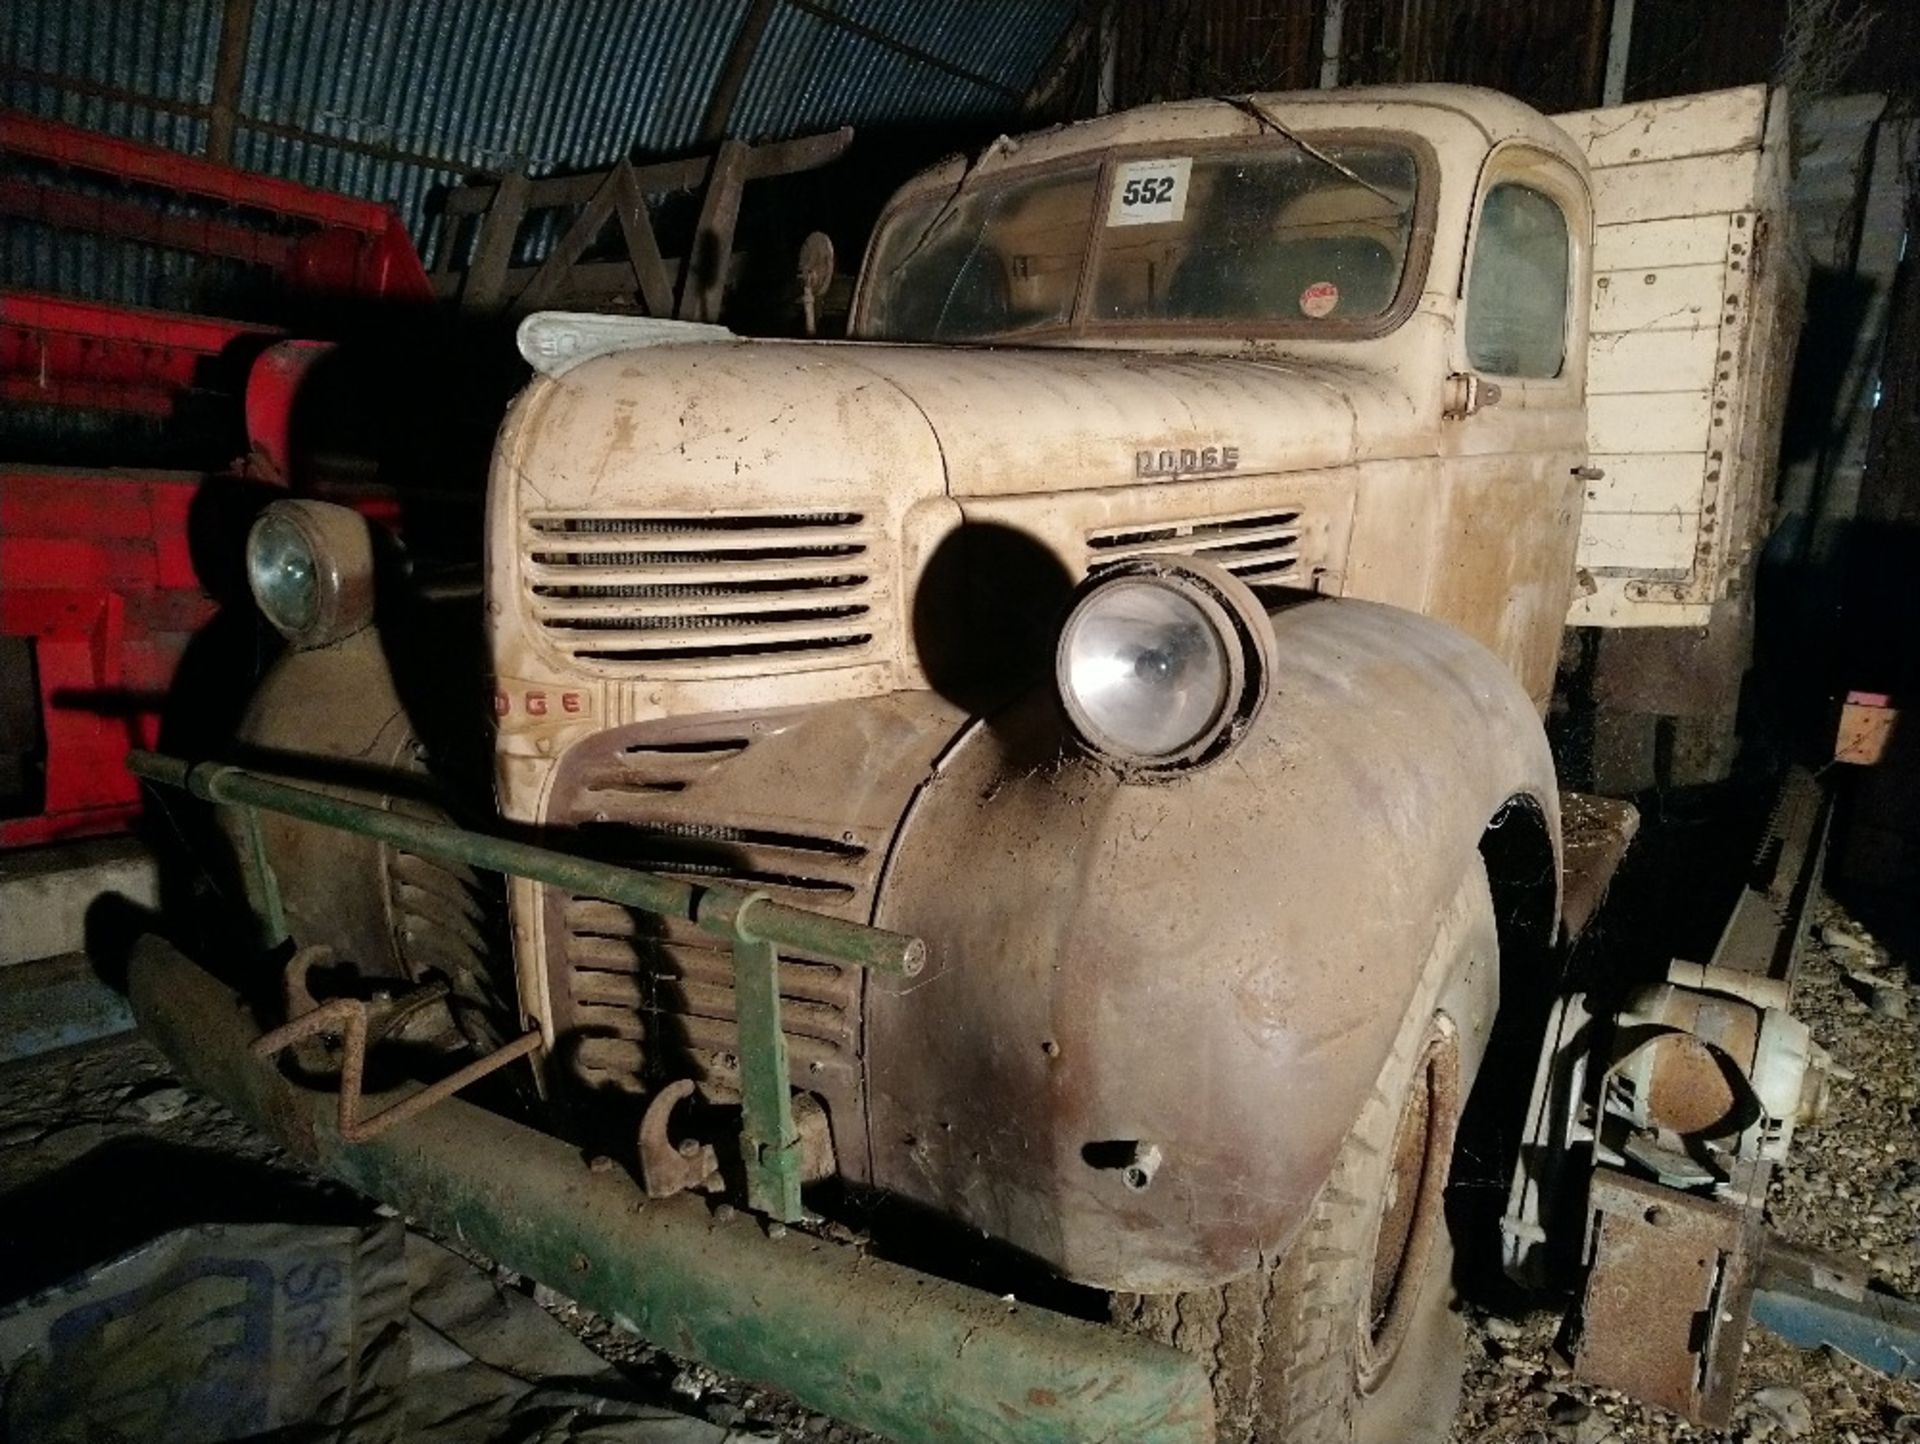 1944 Dodge Lorry Chassis Model D-60420-C-T, Cab Model 21, Chassis Serial No. 91075. - Image 2 of 4